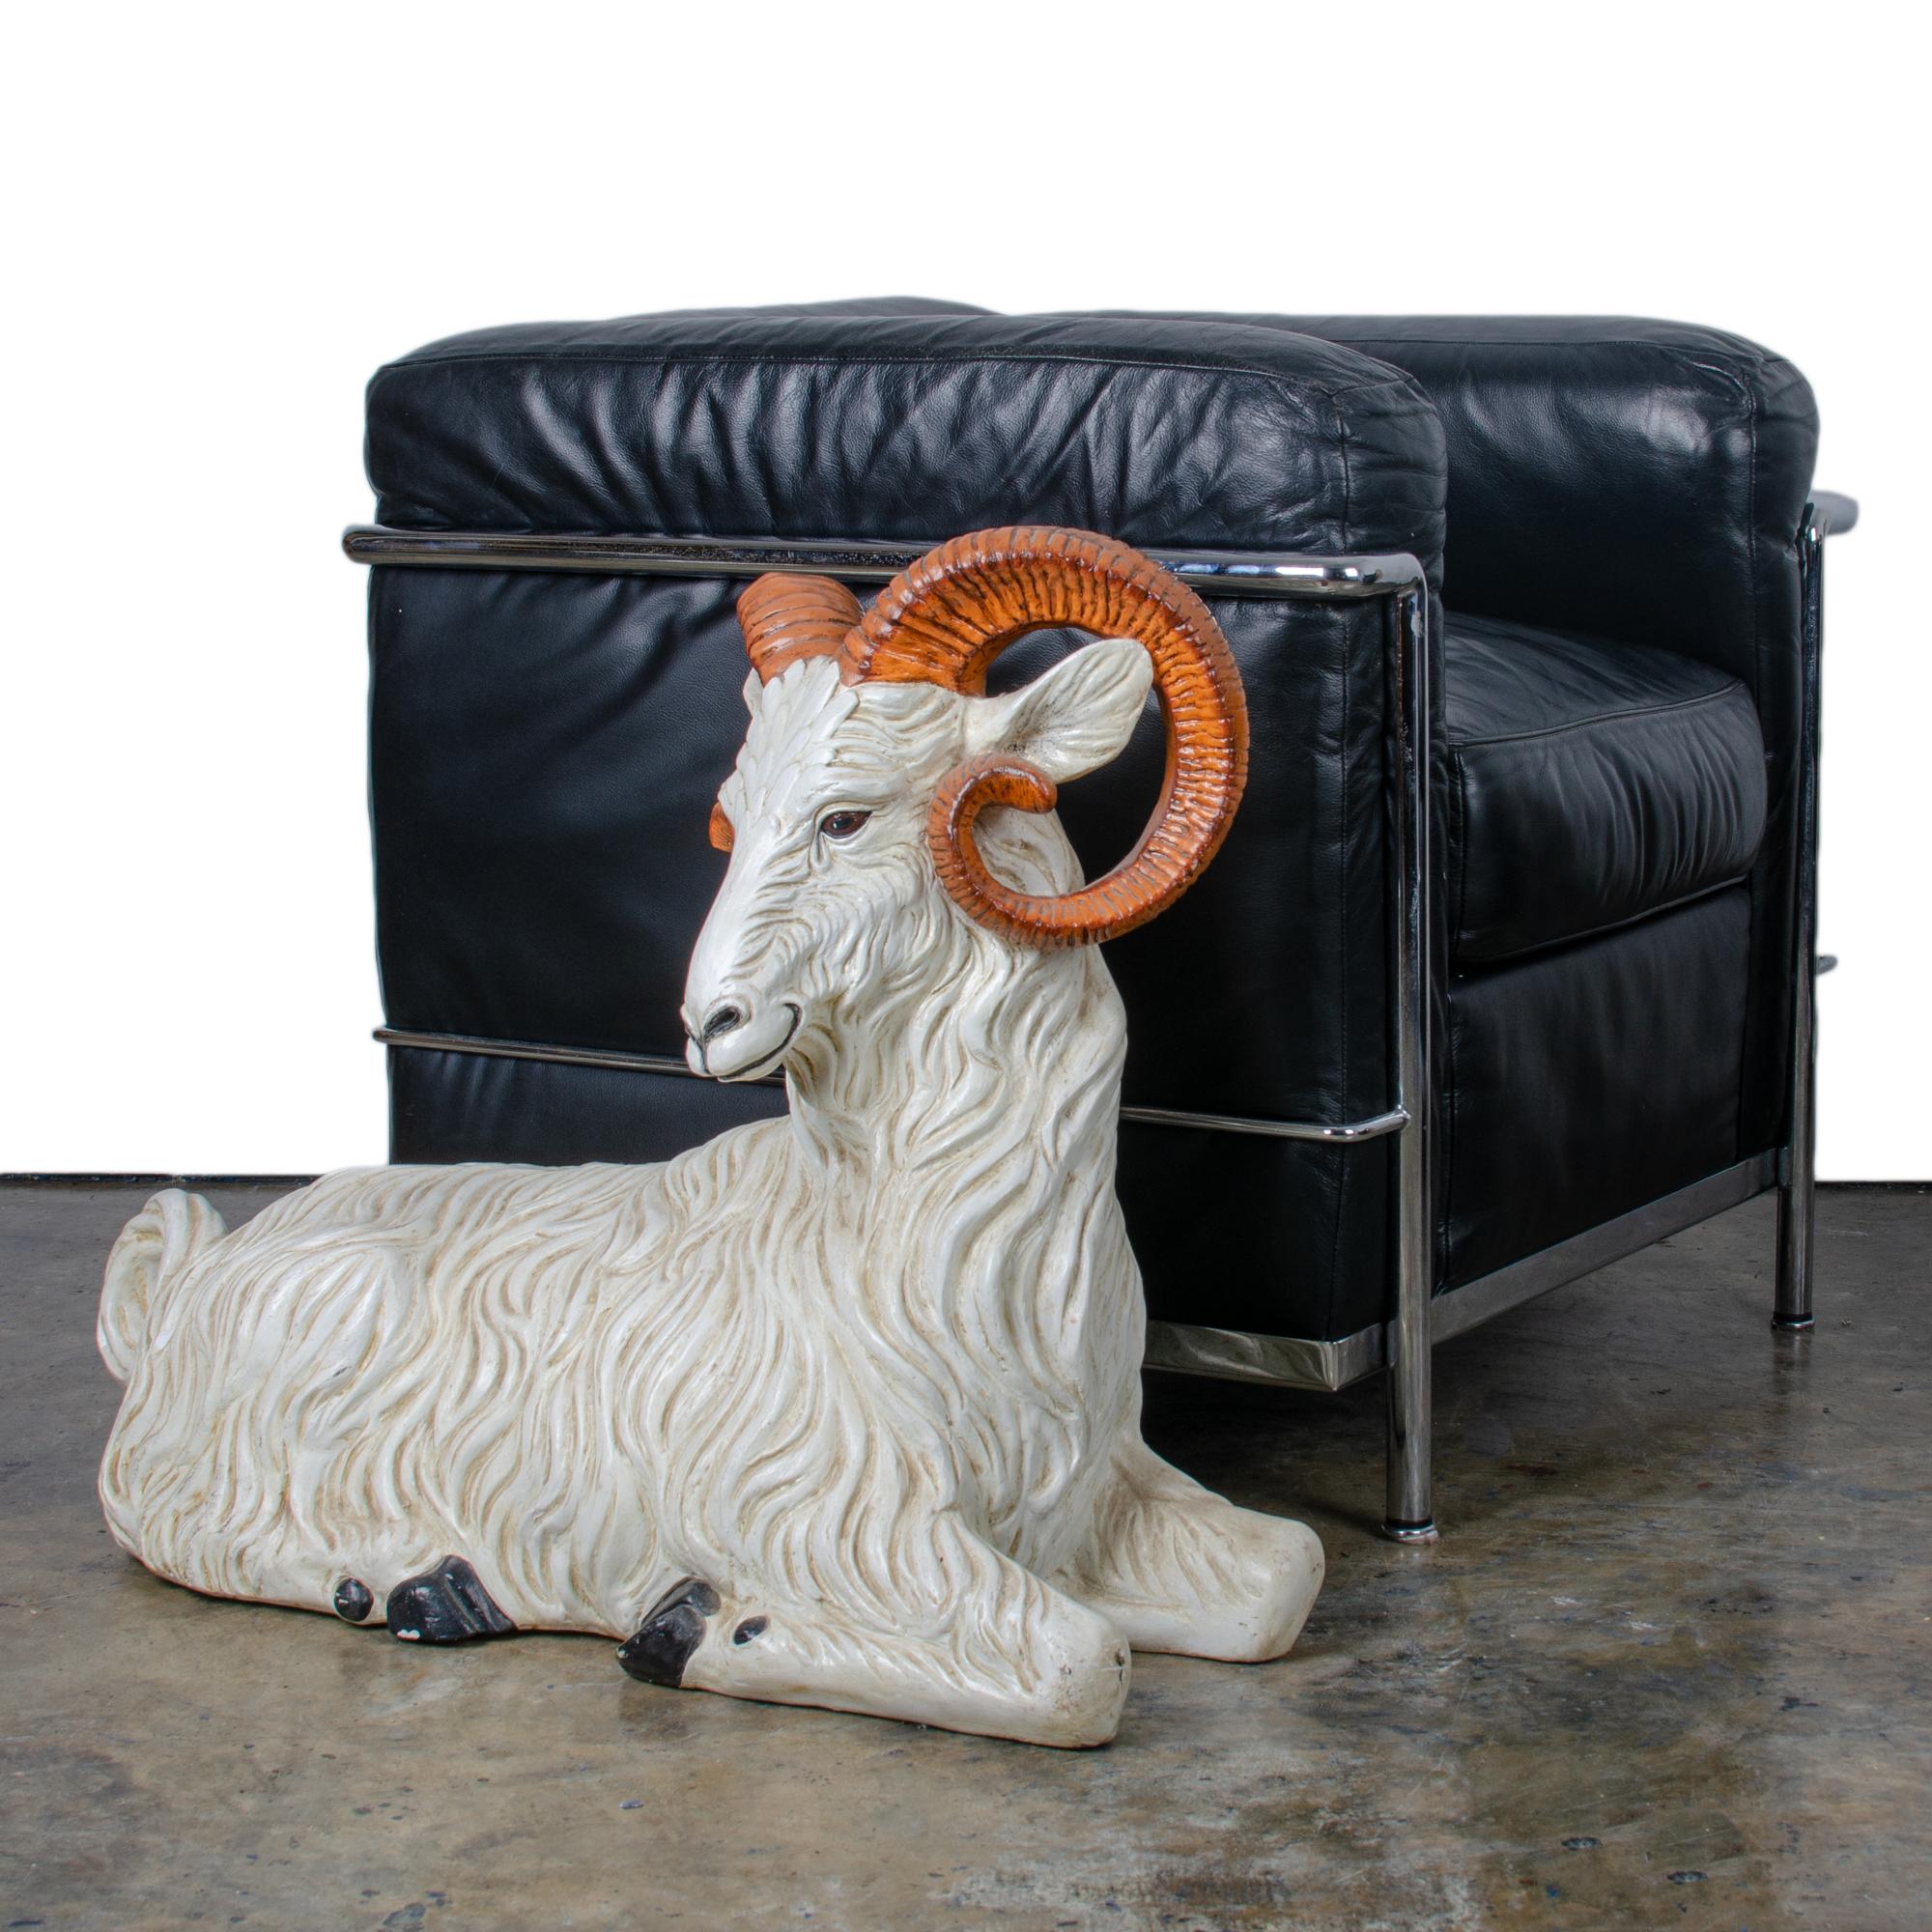 A large ceramic painted and glazed ram made in Italy circa 1970s.

29 inches wide by 14 inches deep by 23 inches tall